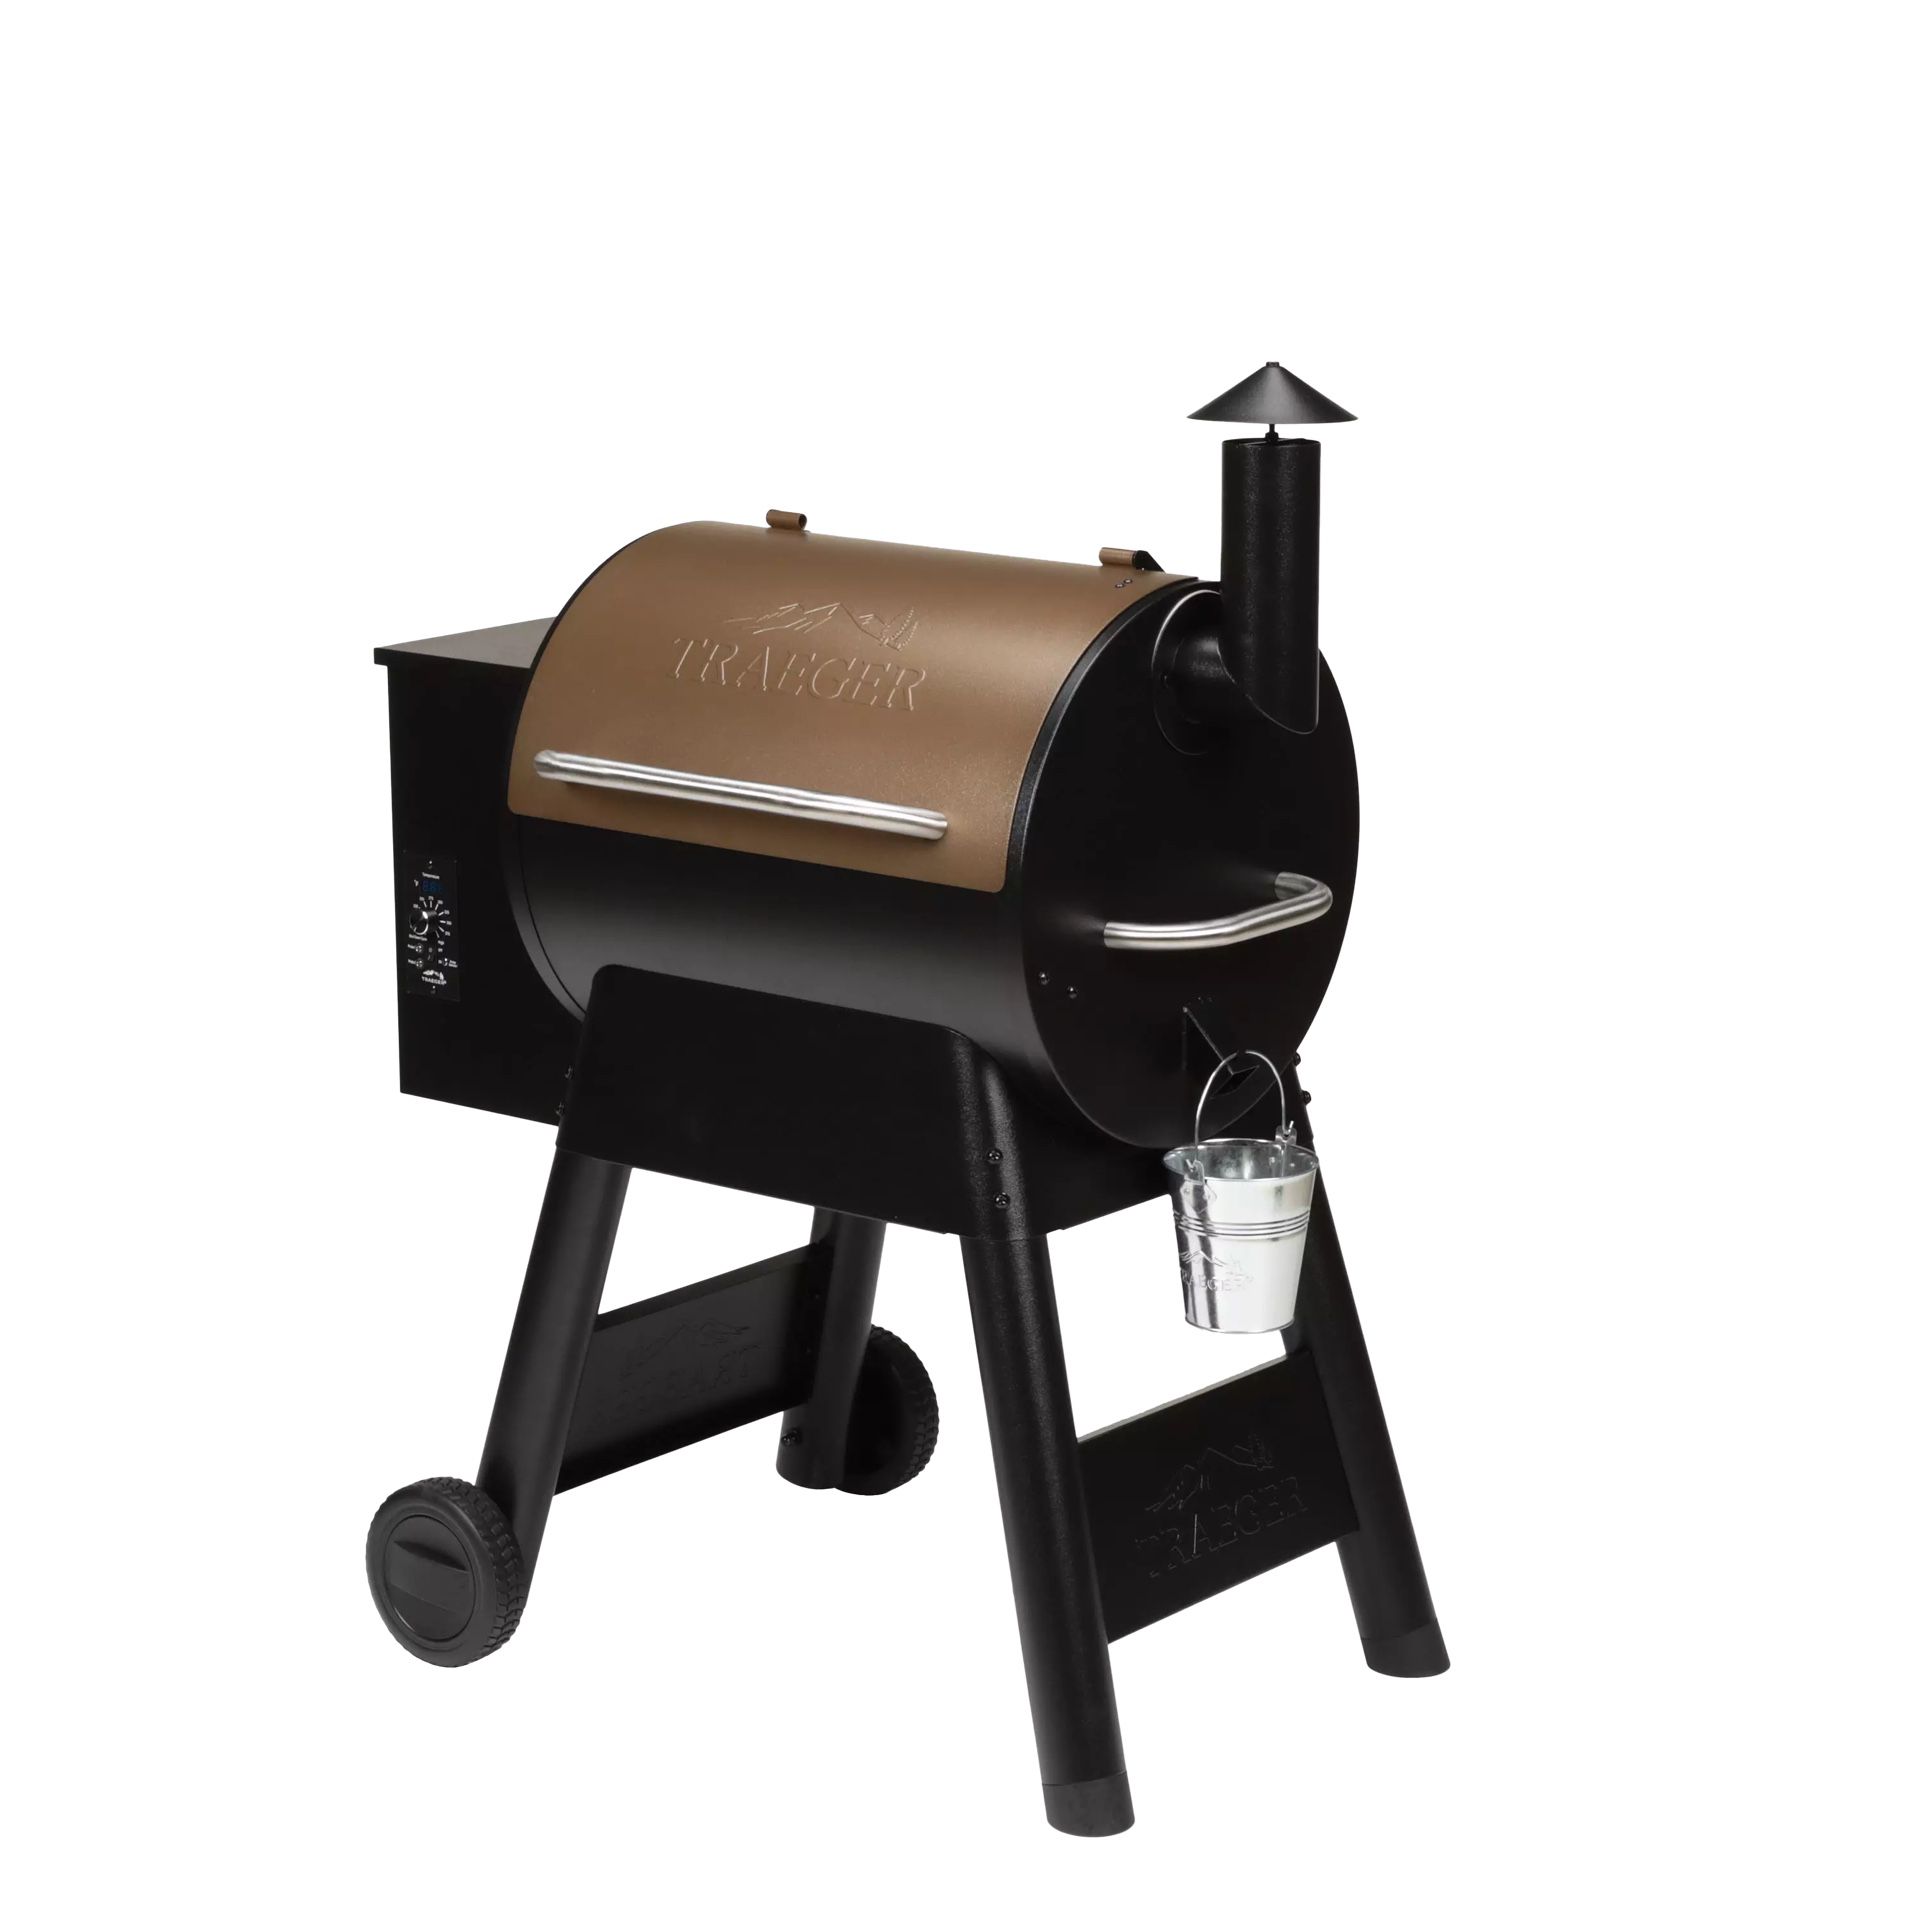 Traeger Grill Pro 22 (Frame Replacement)